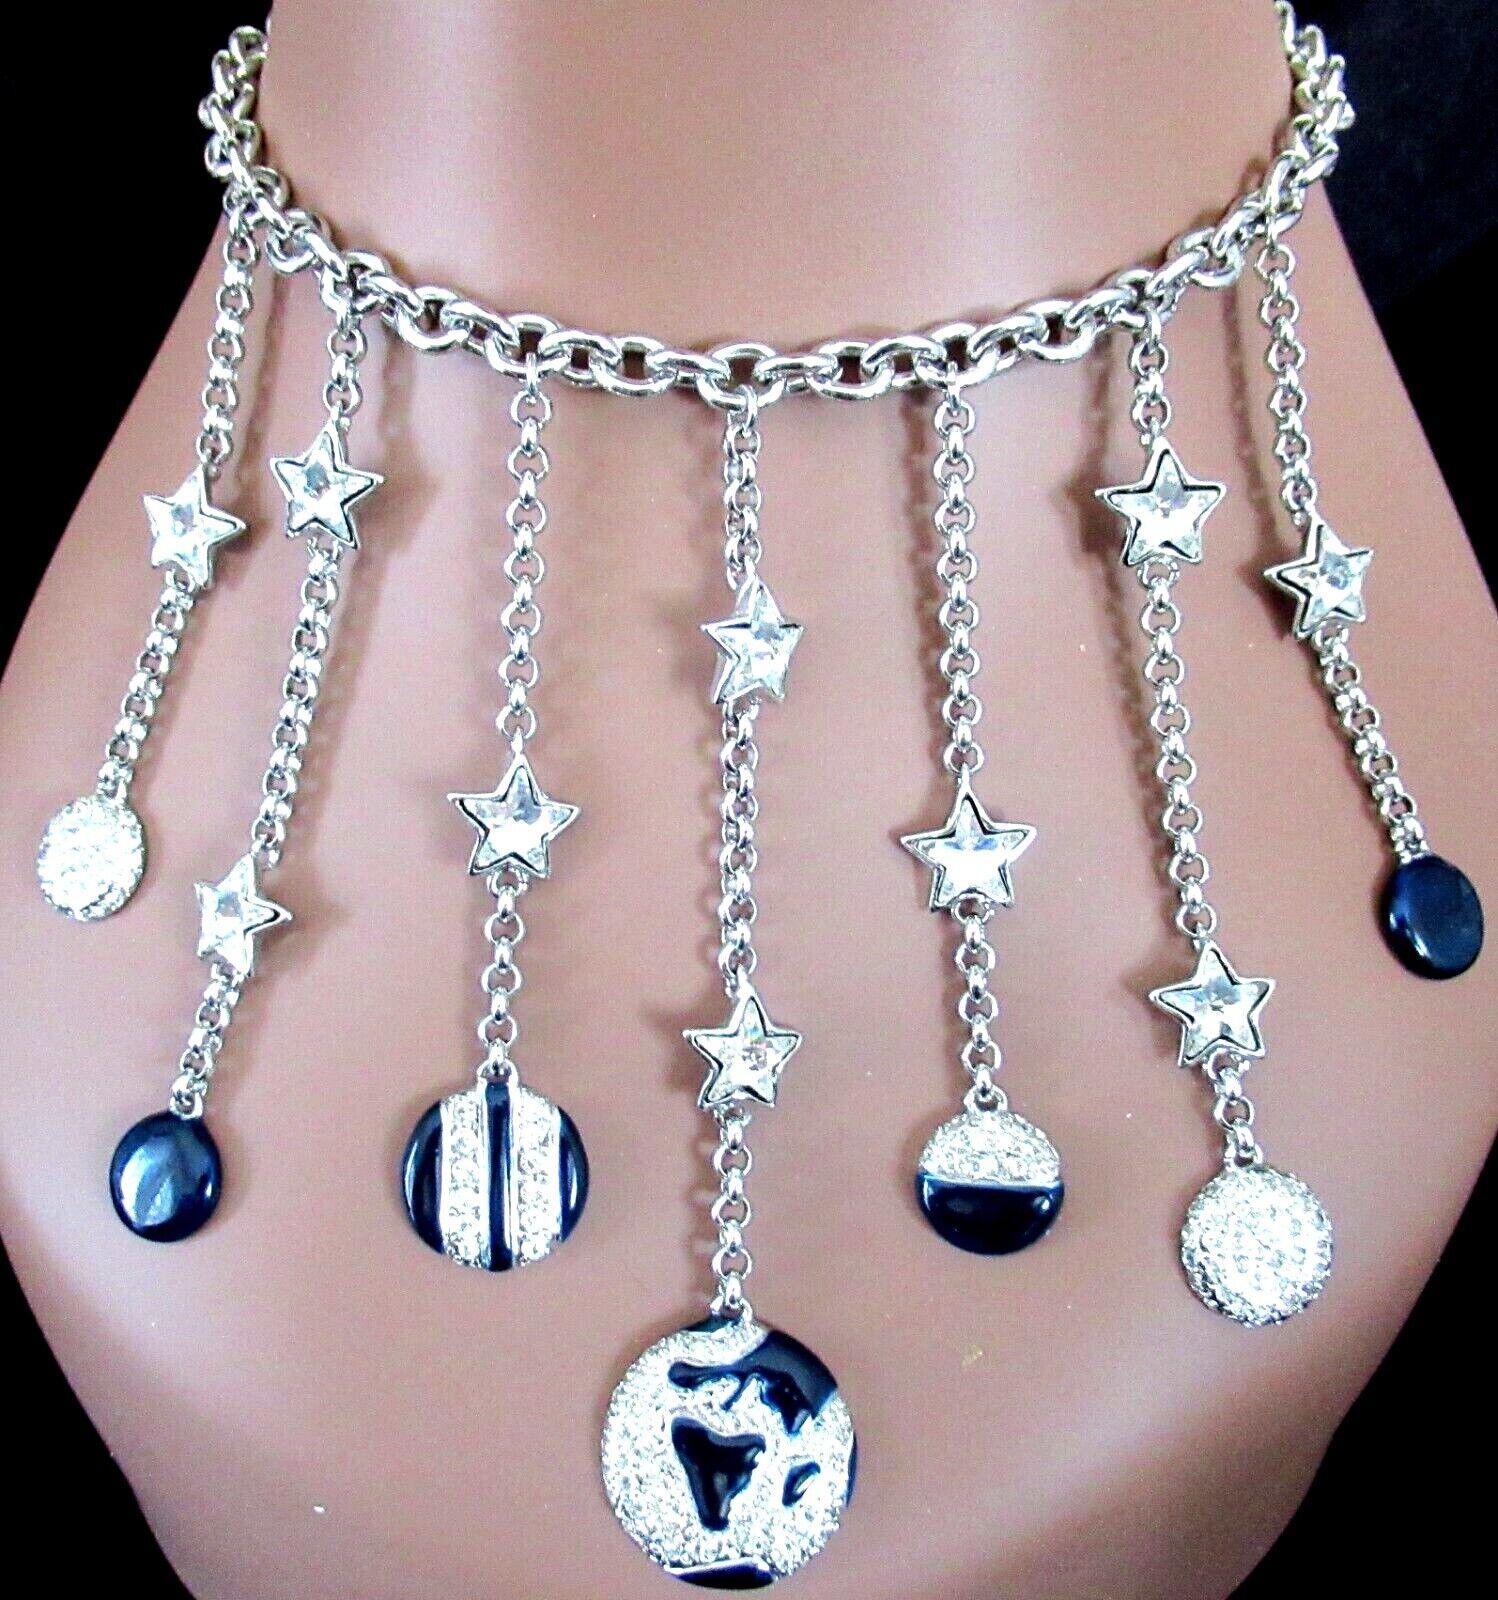 Simply Beautiful!  Vintage Valentino Crystal and Enamel Celestial Moons and Stars Multi Strand Silver Drop Runway Necklace. Featuring 7 drop strands of Sparkling Crystal and Enamel Celestial Moons and Stars. So effective and drapes beautifully.